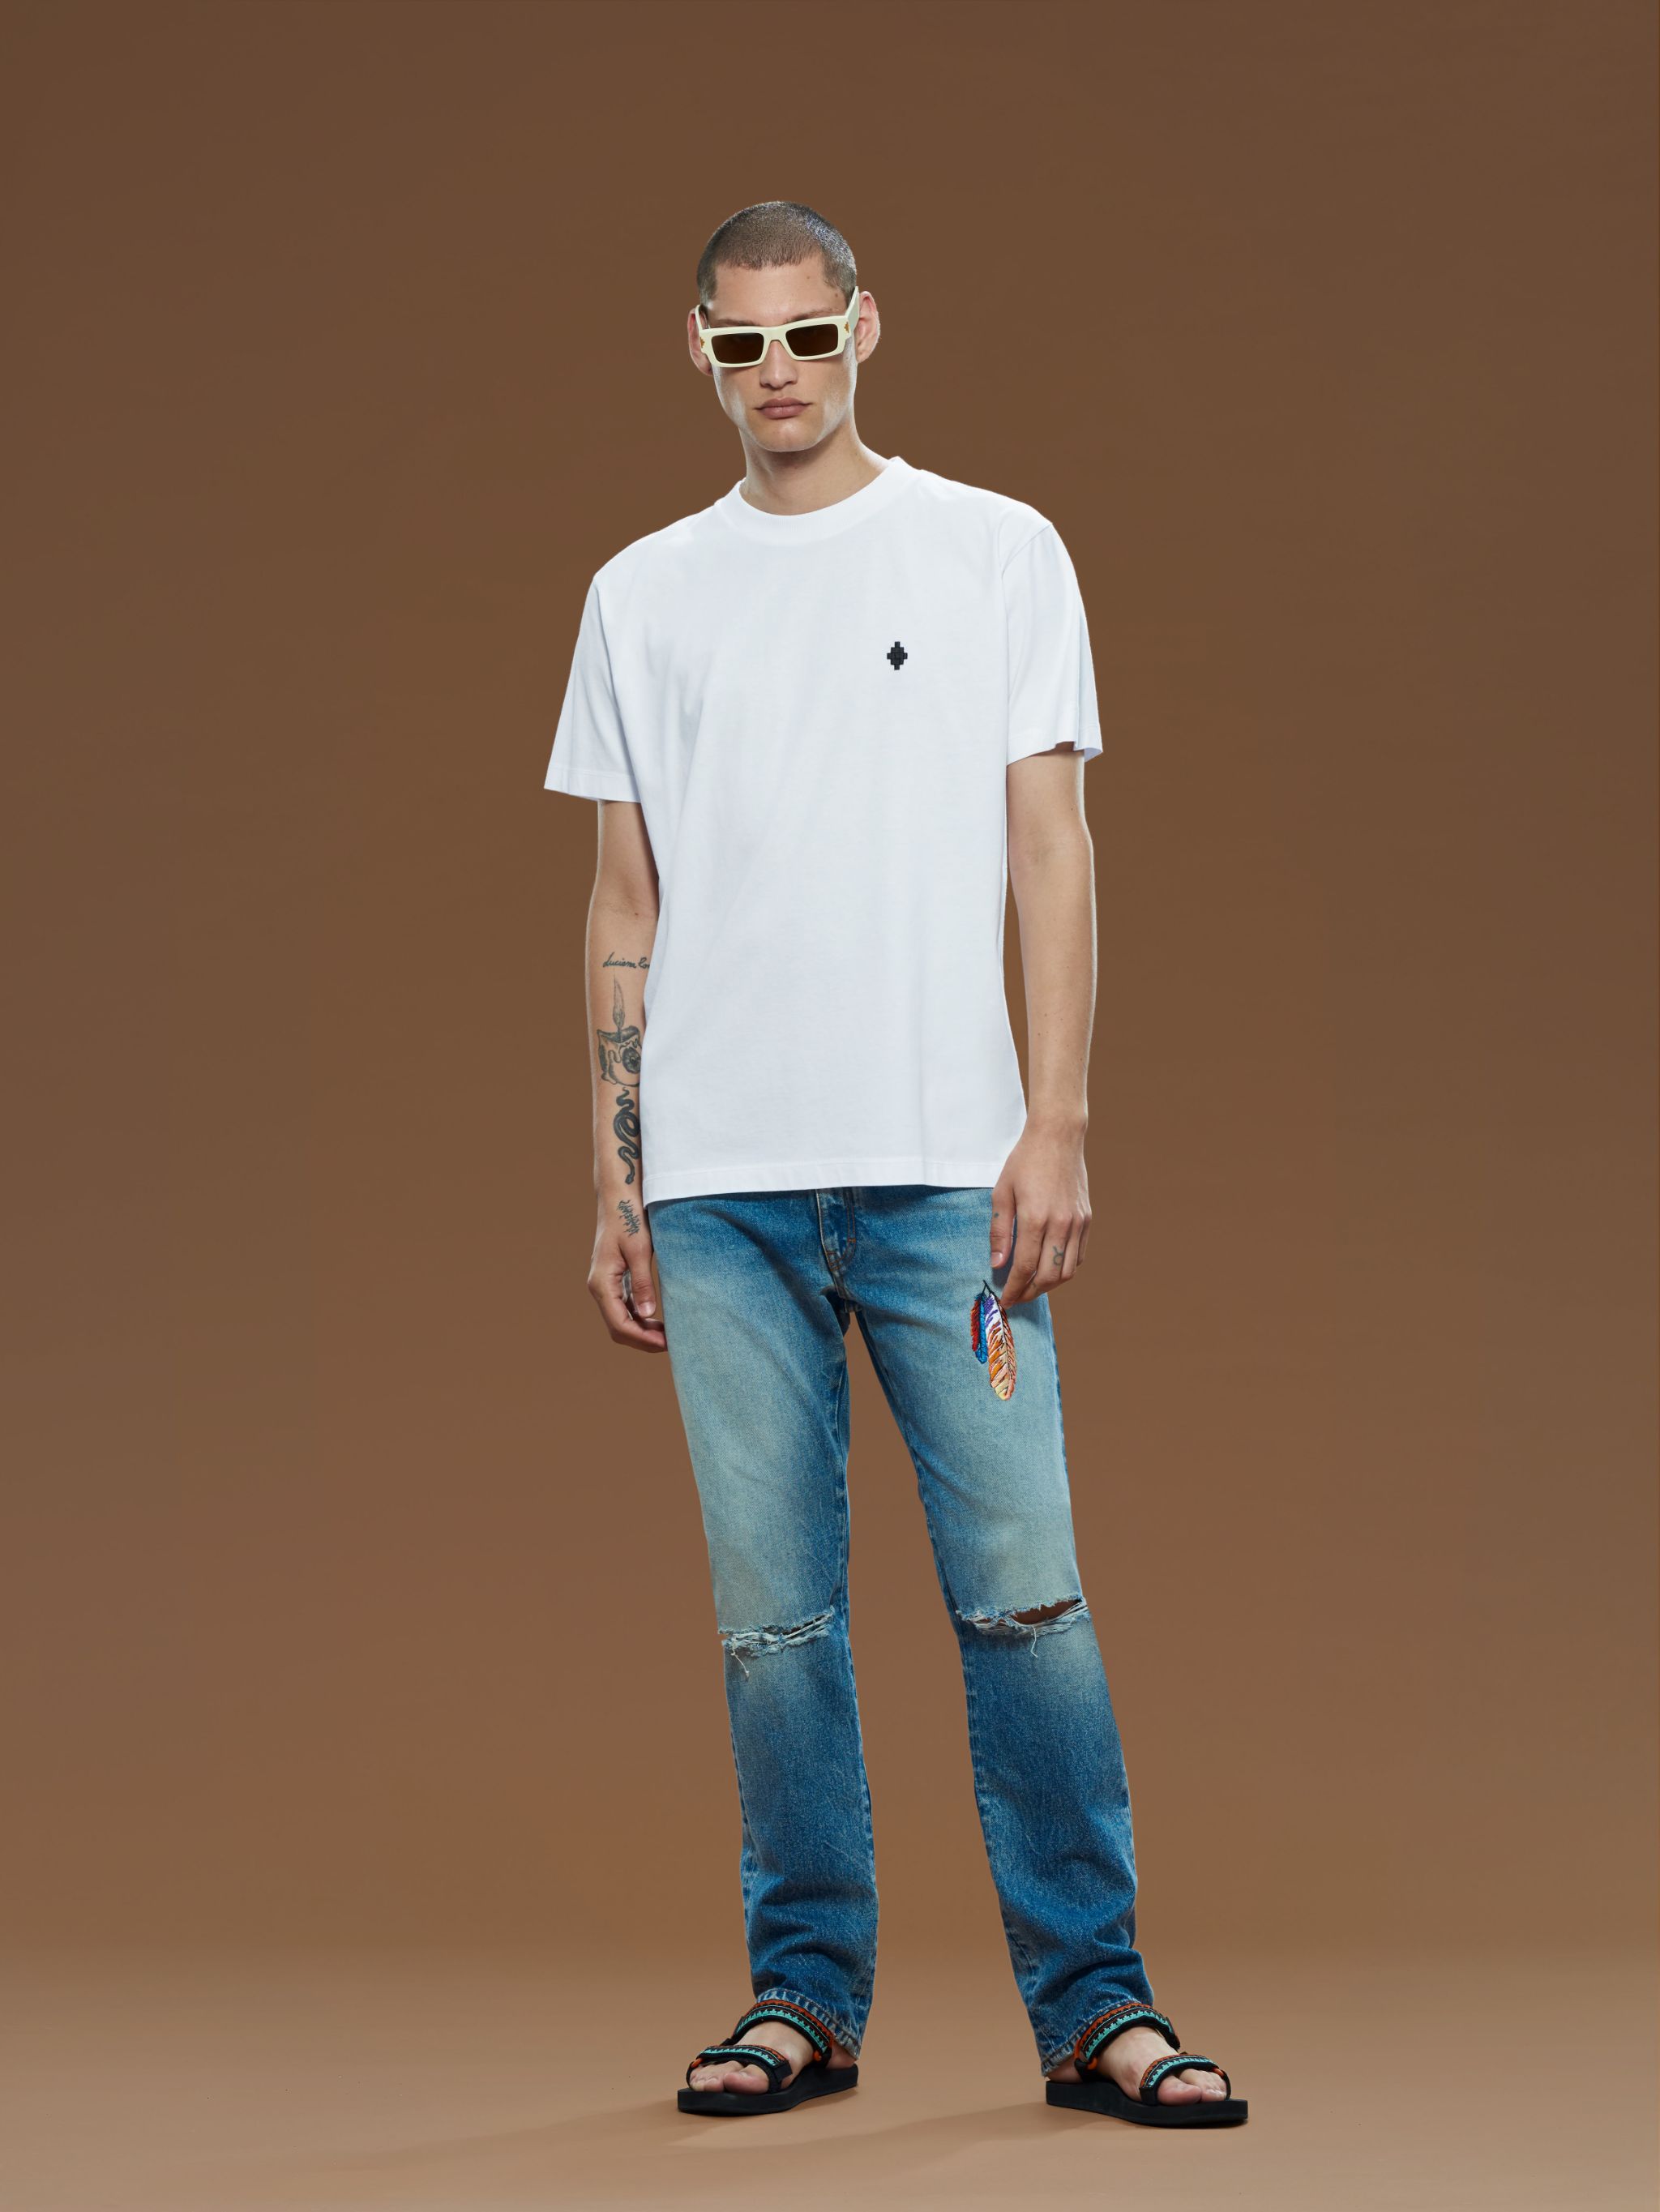 White cotton Cross-logo embroidered cotton T-shirt from Marcelo Burlon County of Milan featuring signature Cross motif, embroidered logo at the chest, round neck, short sleeves and straight hem. Conscious: This item is made from at least 50% organic materials.